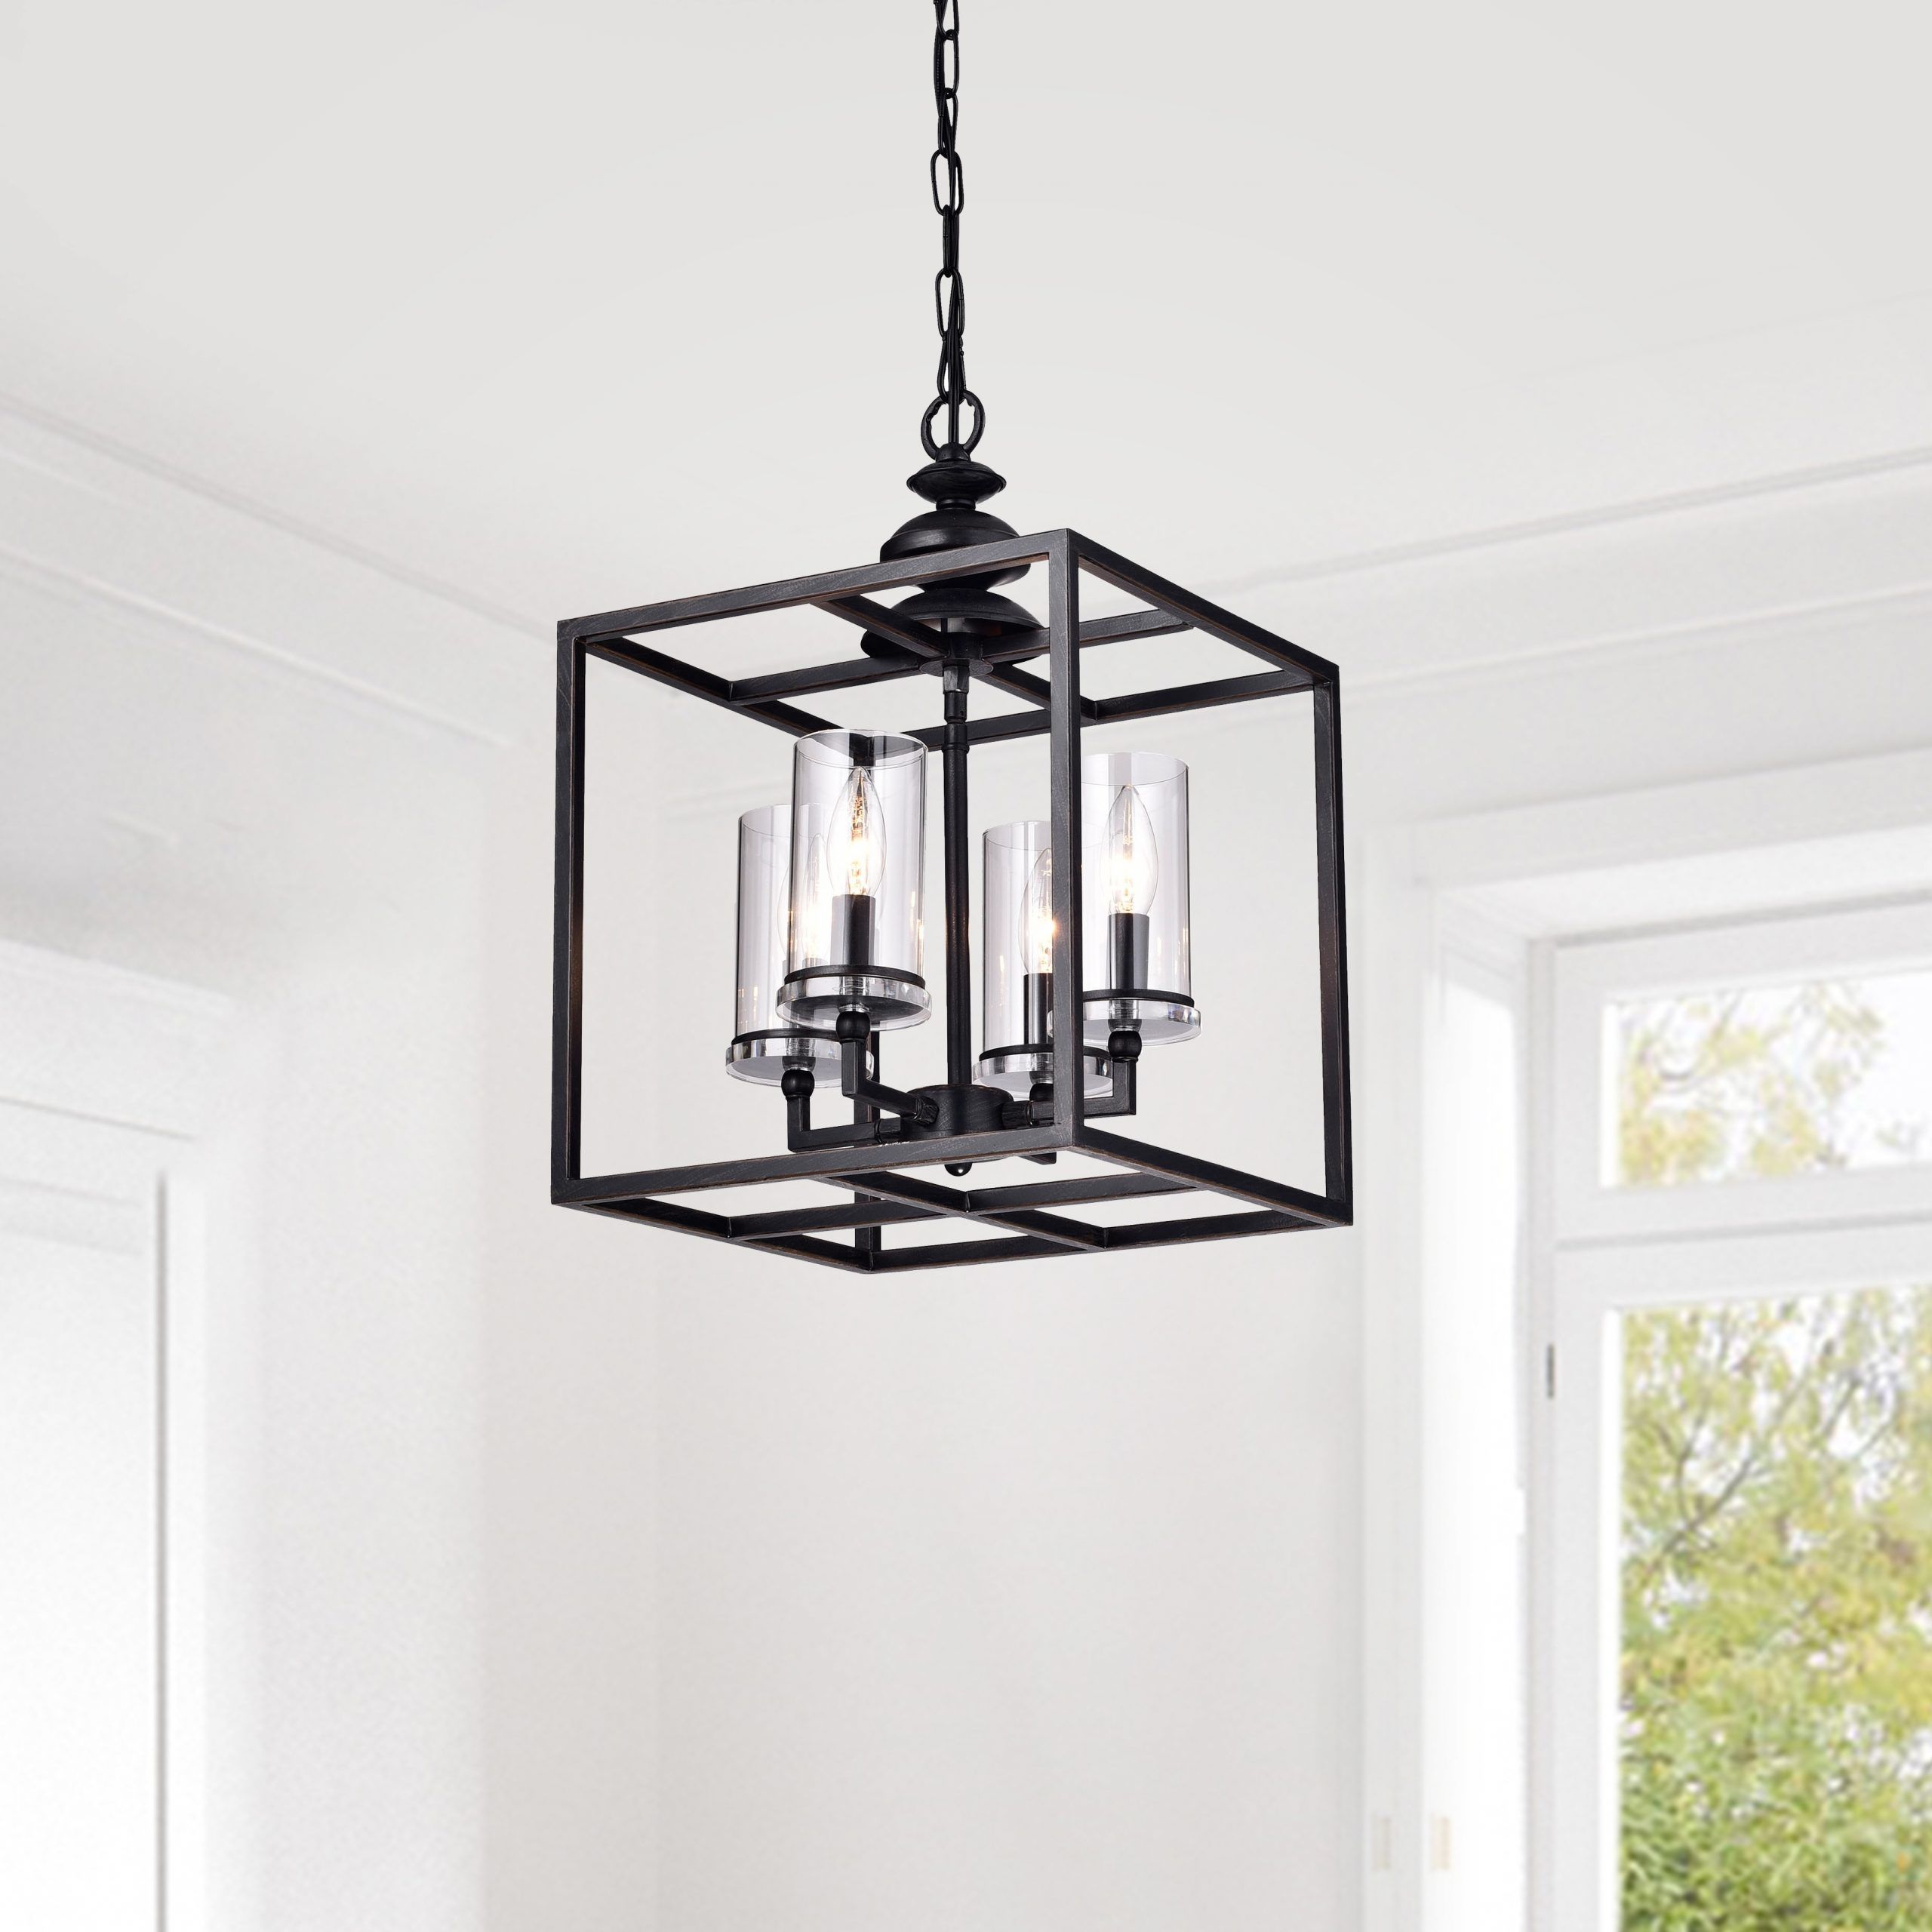 Galena 4 Light Lantern Square Pendant – On Sale – Overstock – 31706629 With Regard To Four Light Lantern Chandeliers (View 12 of 15)